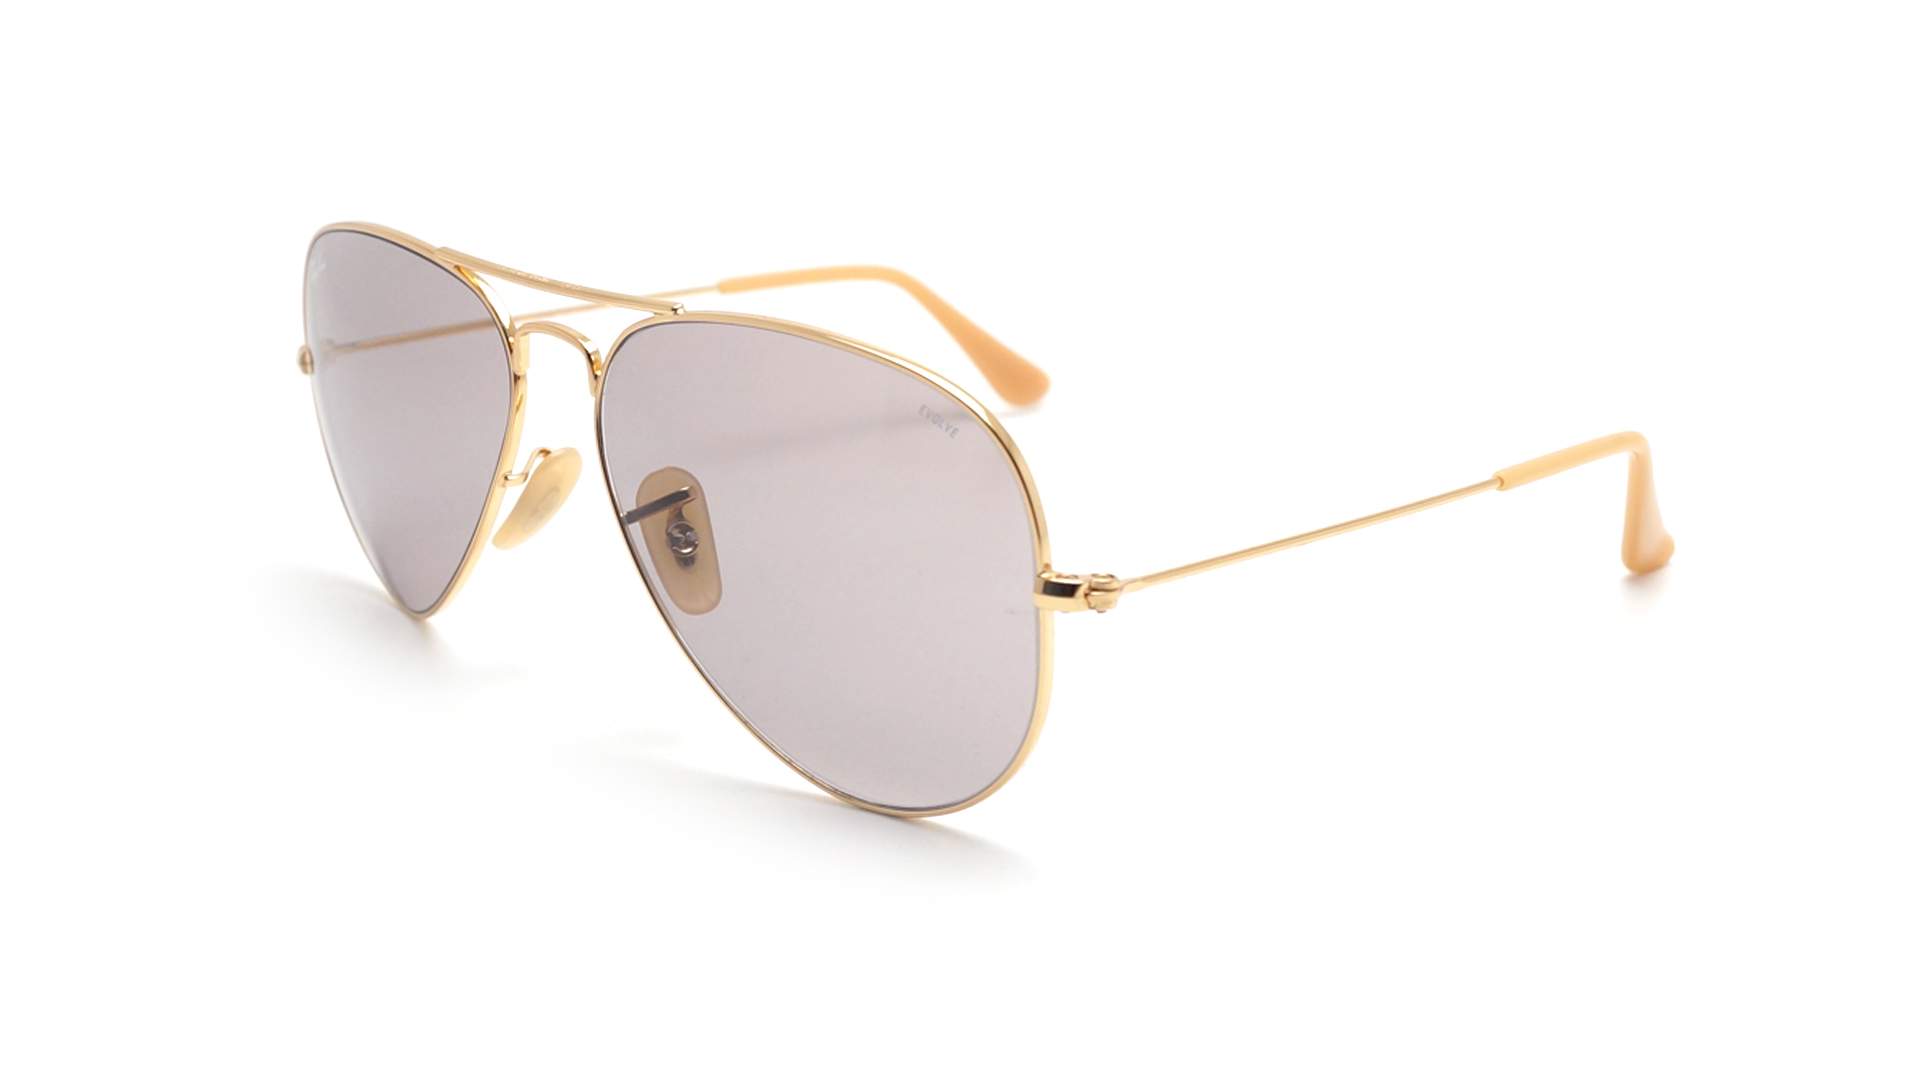 ray ban evolve lenses meaning